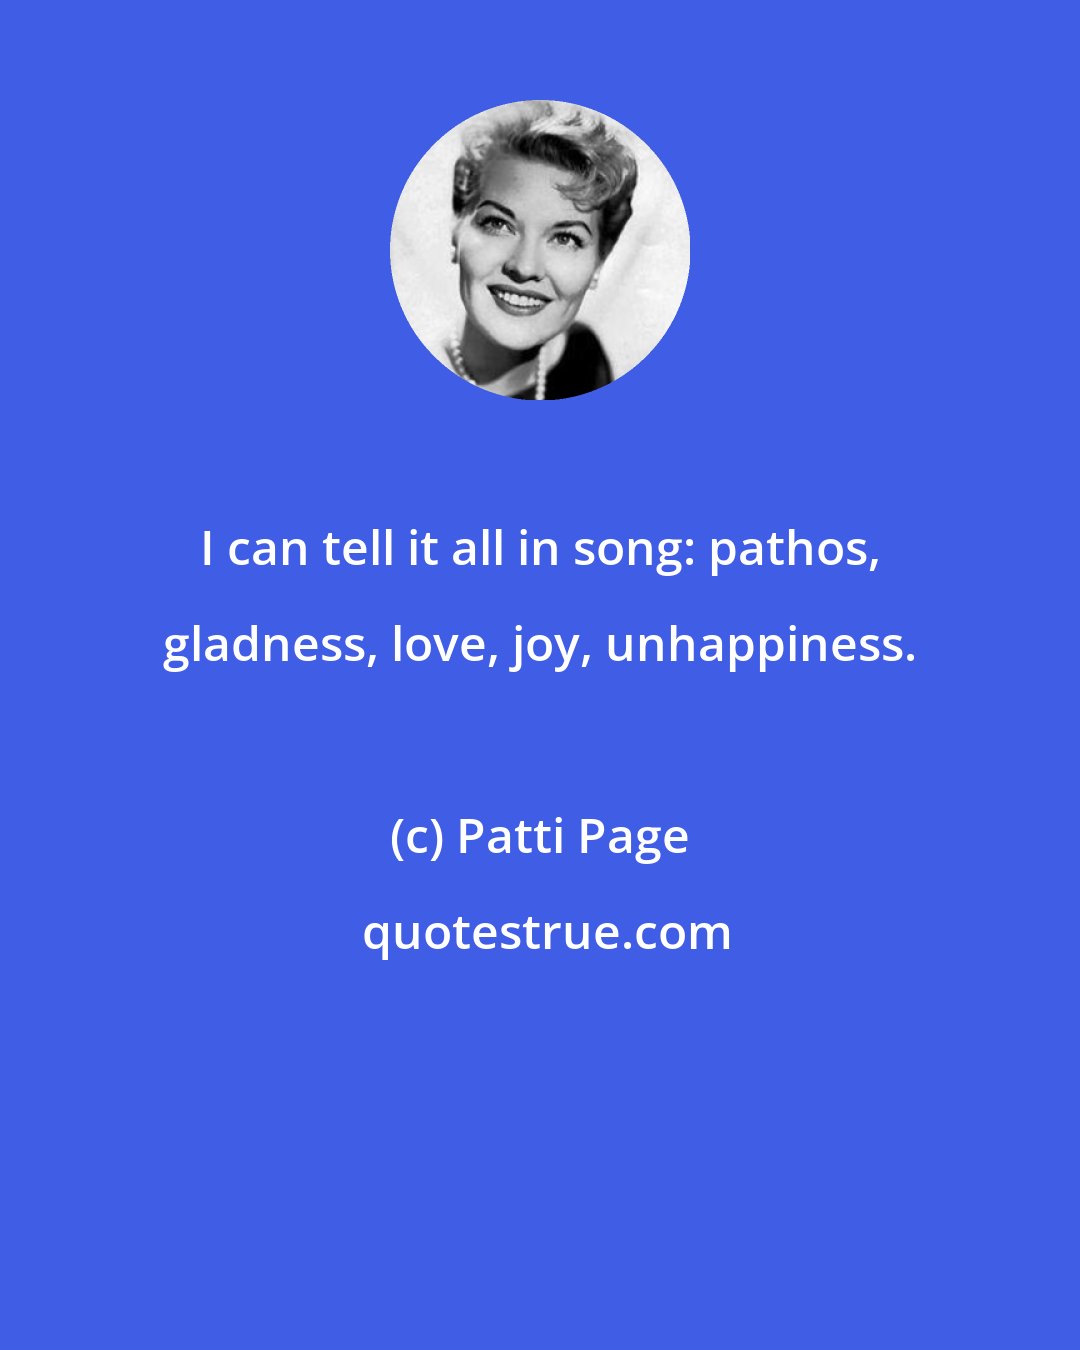 Patti Page: I can tell it all in song: pathos, gladness, love, joy, unhappiness.